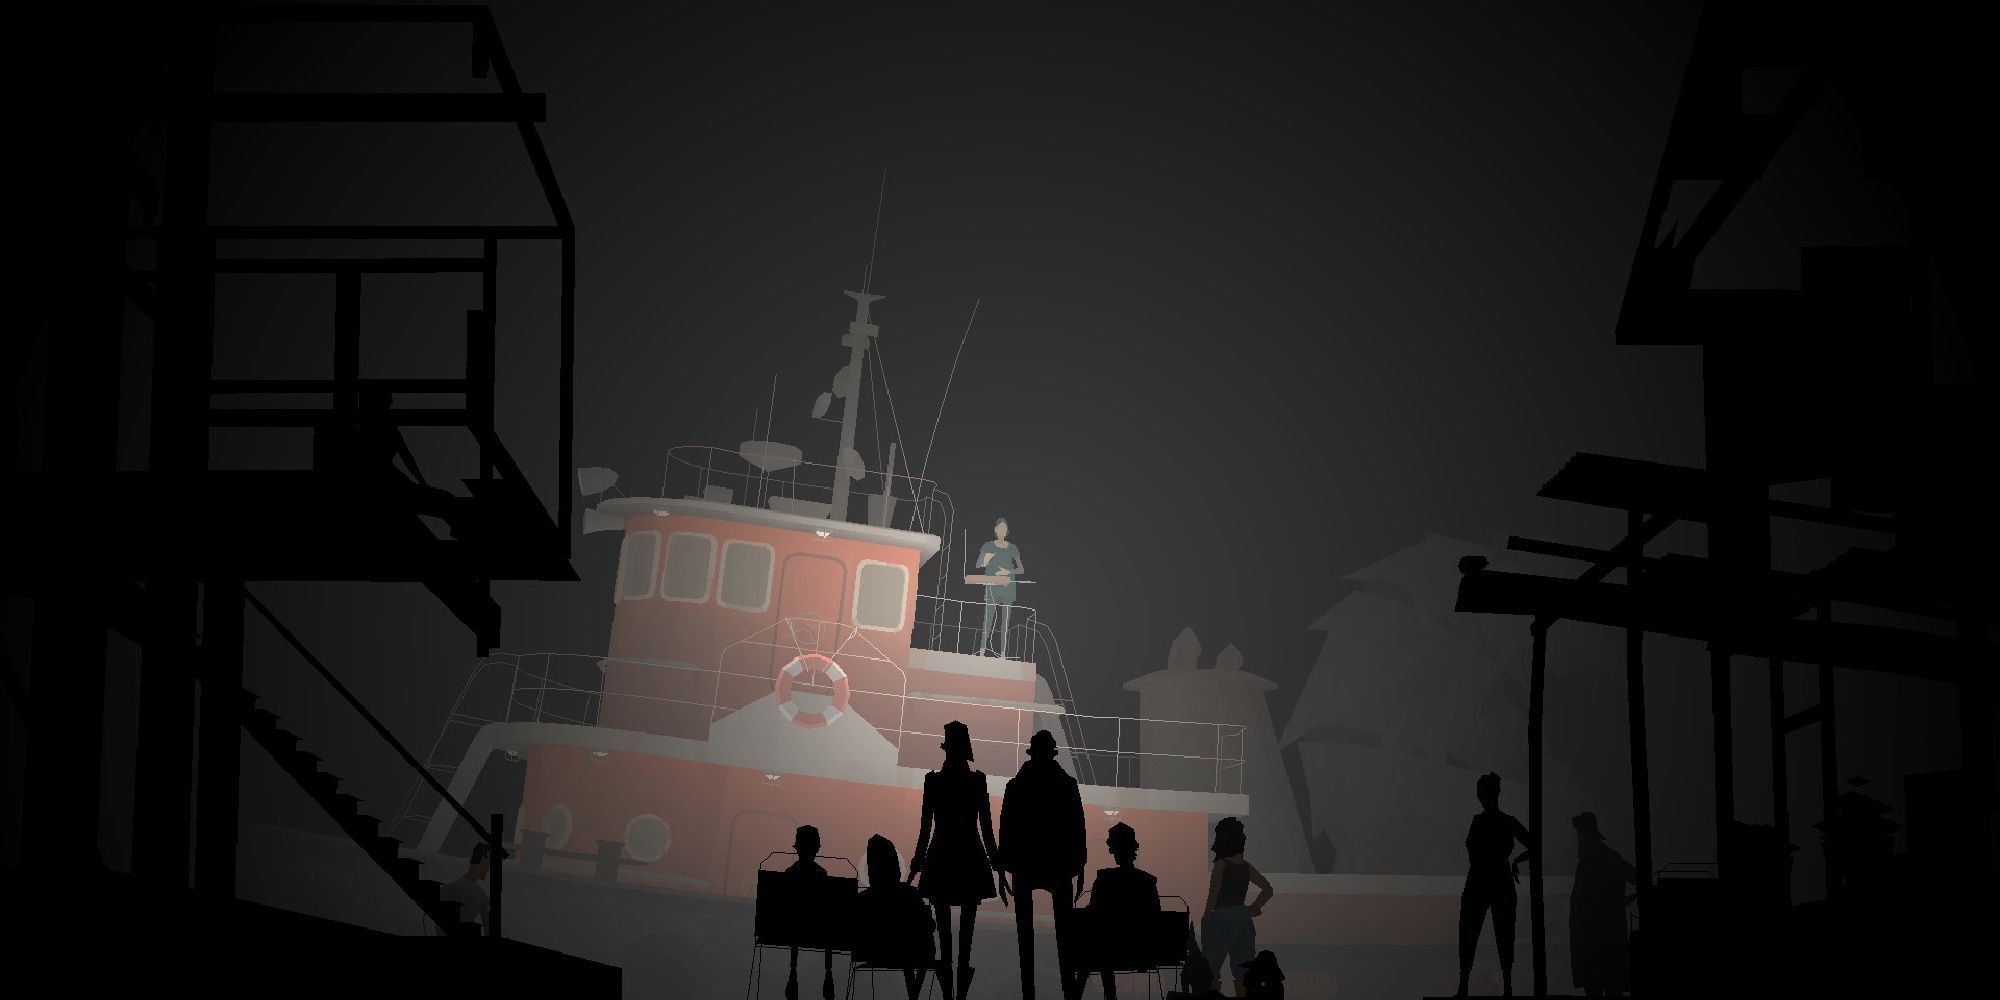 The cast of Kentucky Route Zero, seen in silhouette, gazes up at a red ferry boat